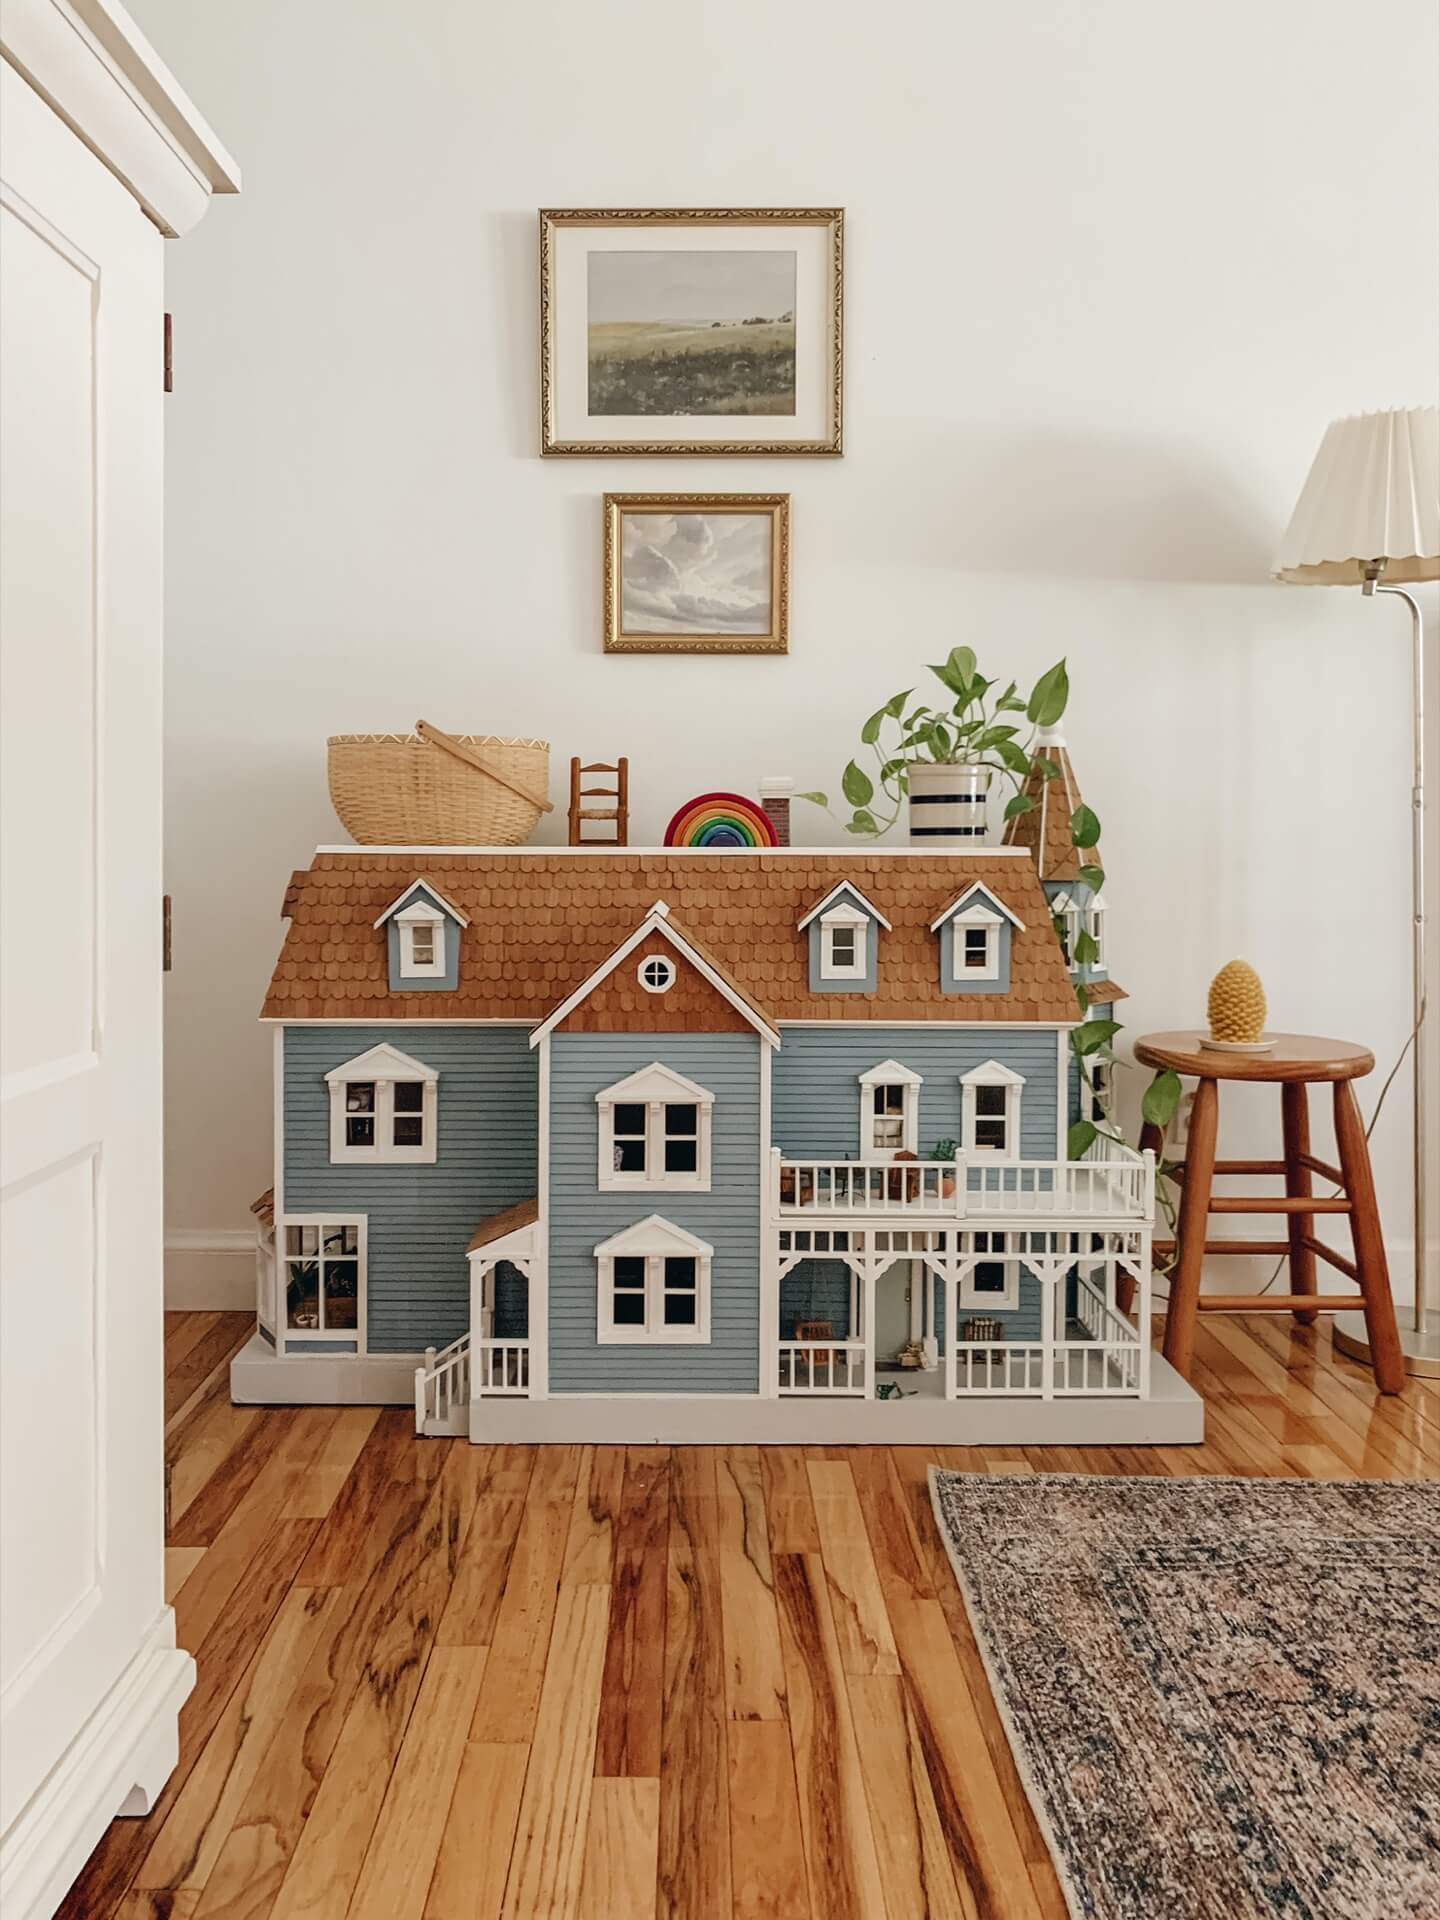 Home tour with Leah Gaeddert - a beautiful dolls house is displayed in one room. 